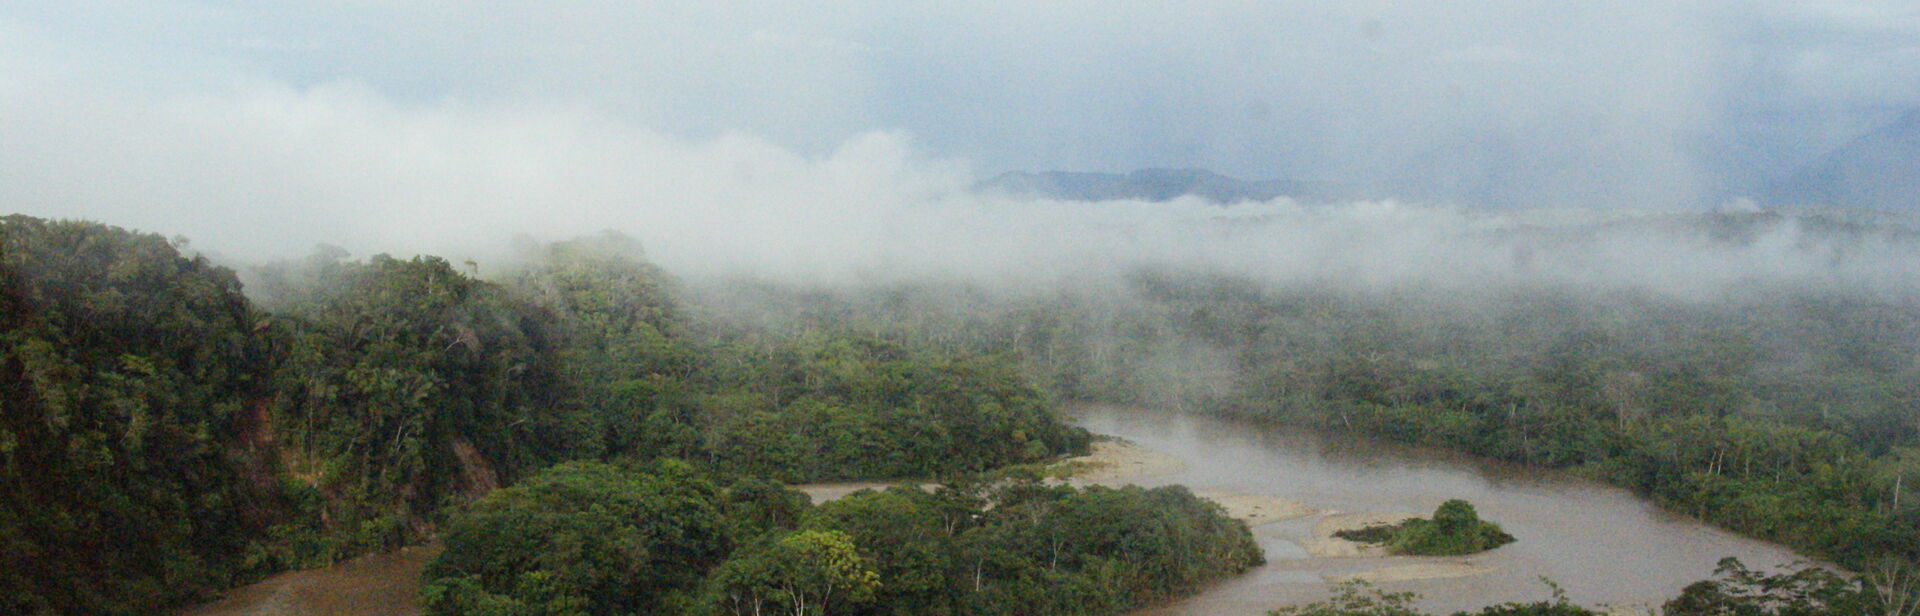 a misty view of the rainforest and river